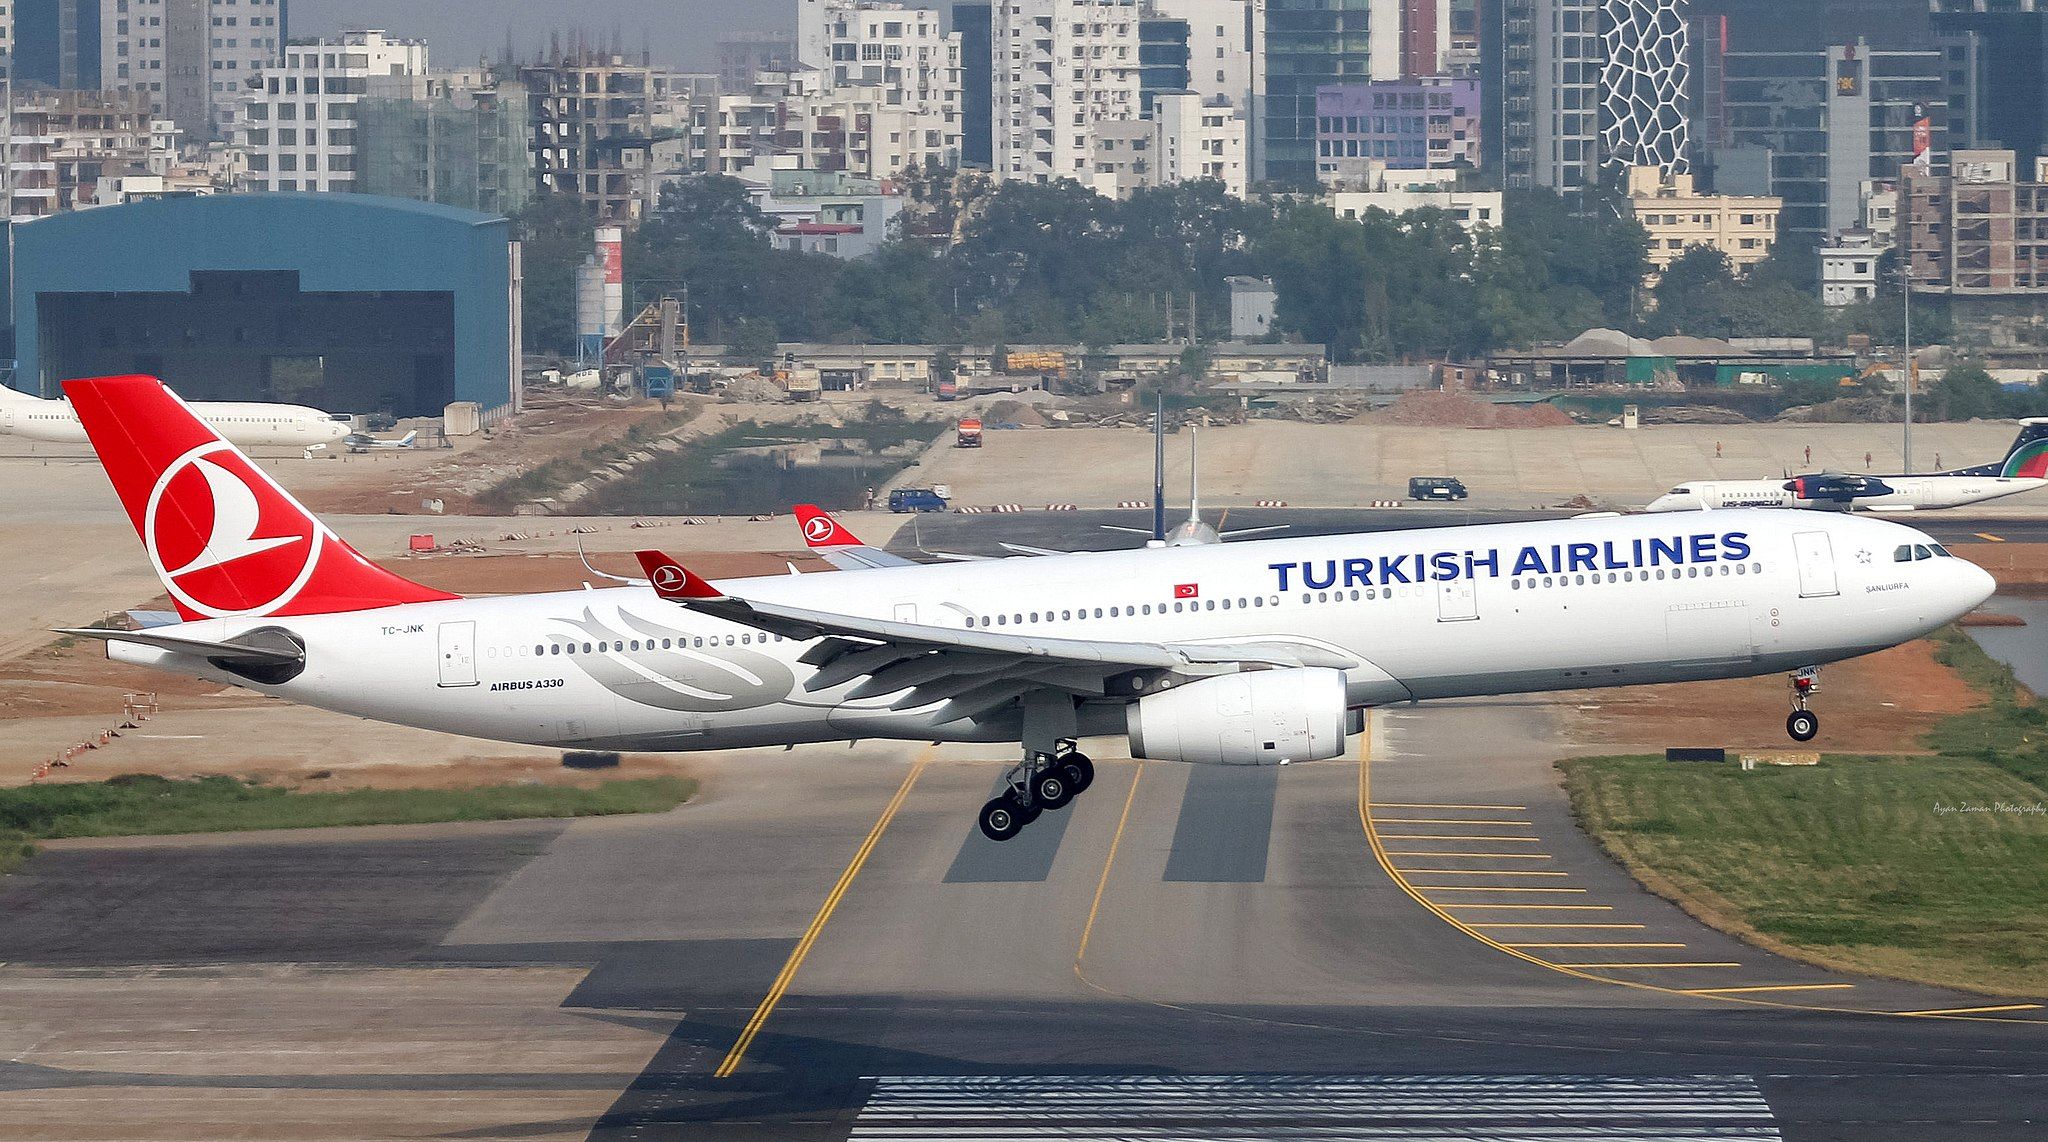 A Turkish Airlines-branded passenger plane